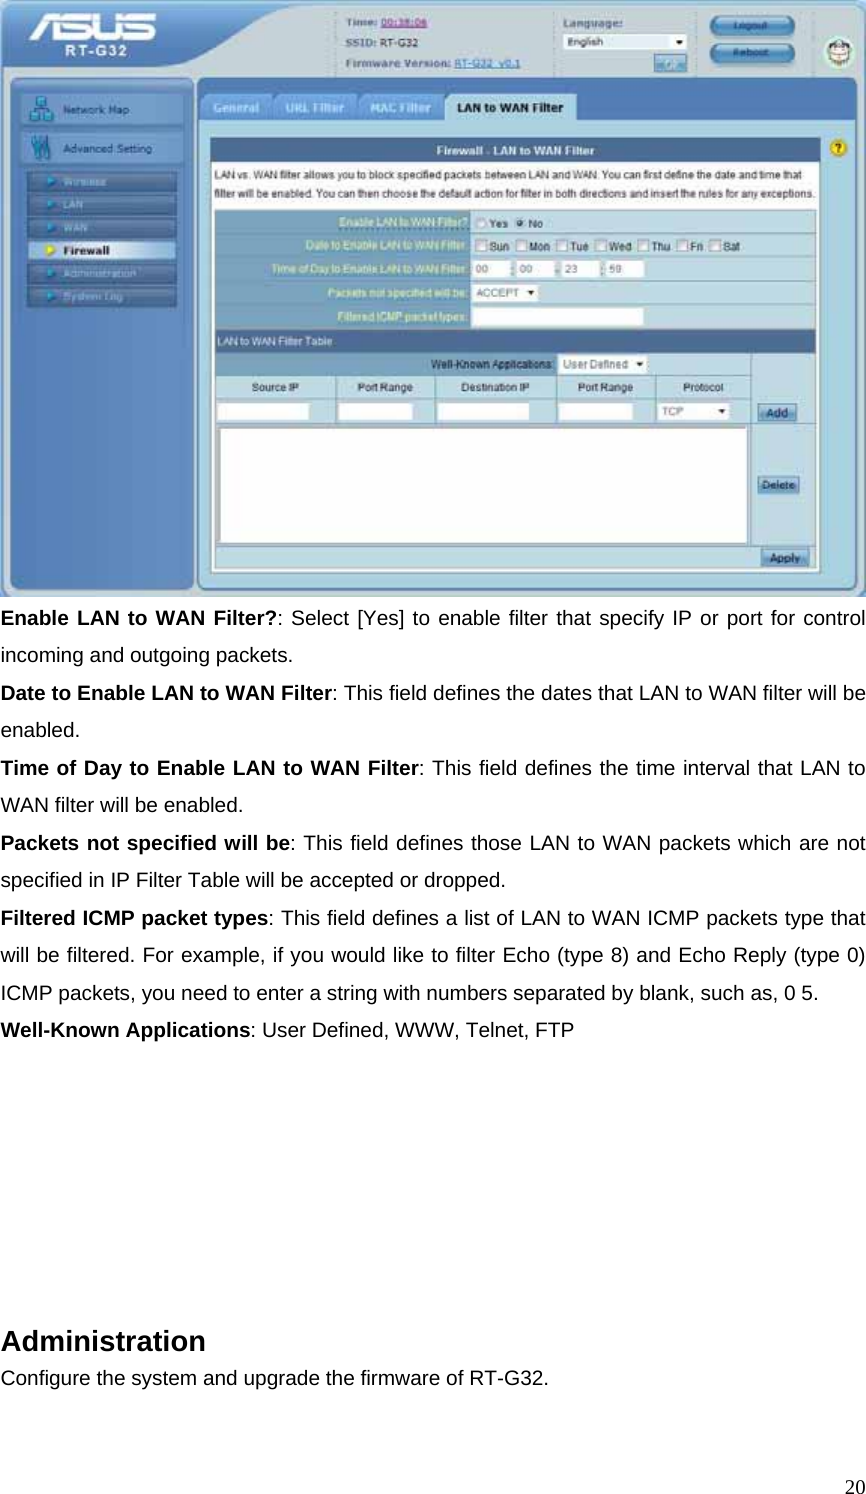  20 Enable LAN to WAN Filter?: Select [Yes] to enable filter that specify IP or port for control incoming and outgoing packets. Date to Enable LAN to WAN Filter: This field defines the dates that LAN to WAN filter will be enabled. Time of Day to Enable LAN to WAN Filter: This field defines the time interval that LAN to WAN filter will be enabled. Packets not specified will be: This field defines those LAN to WAN packets which are not specified in IP Filter Table will be accepted or dropped. Filtered ICMP packet types: This field defines a list of LAN to WAN ICMP packets type that will be filtered. For example, if you would like to filter Echo (type 8) and Echo Reply (type 0) ICMP packets, you need to enter a string with numbers separated by blank, such as, 0 5. Well-Known Applications: User Defined, WWW, Telnet, FTP        Administration Configure the system and upgrade the firmware of RT-G32.  